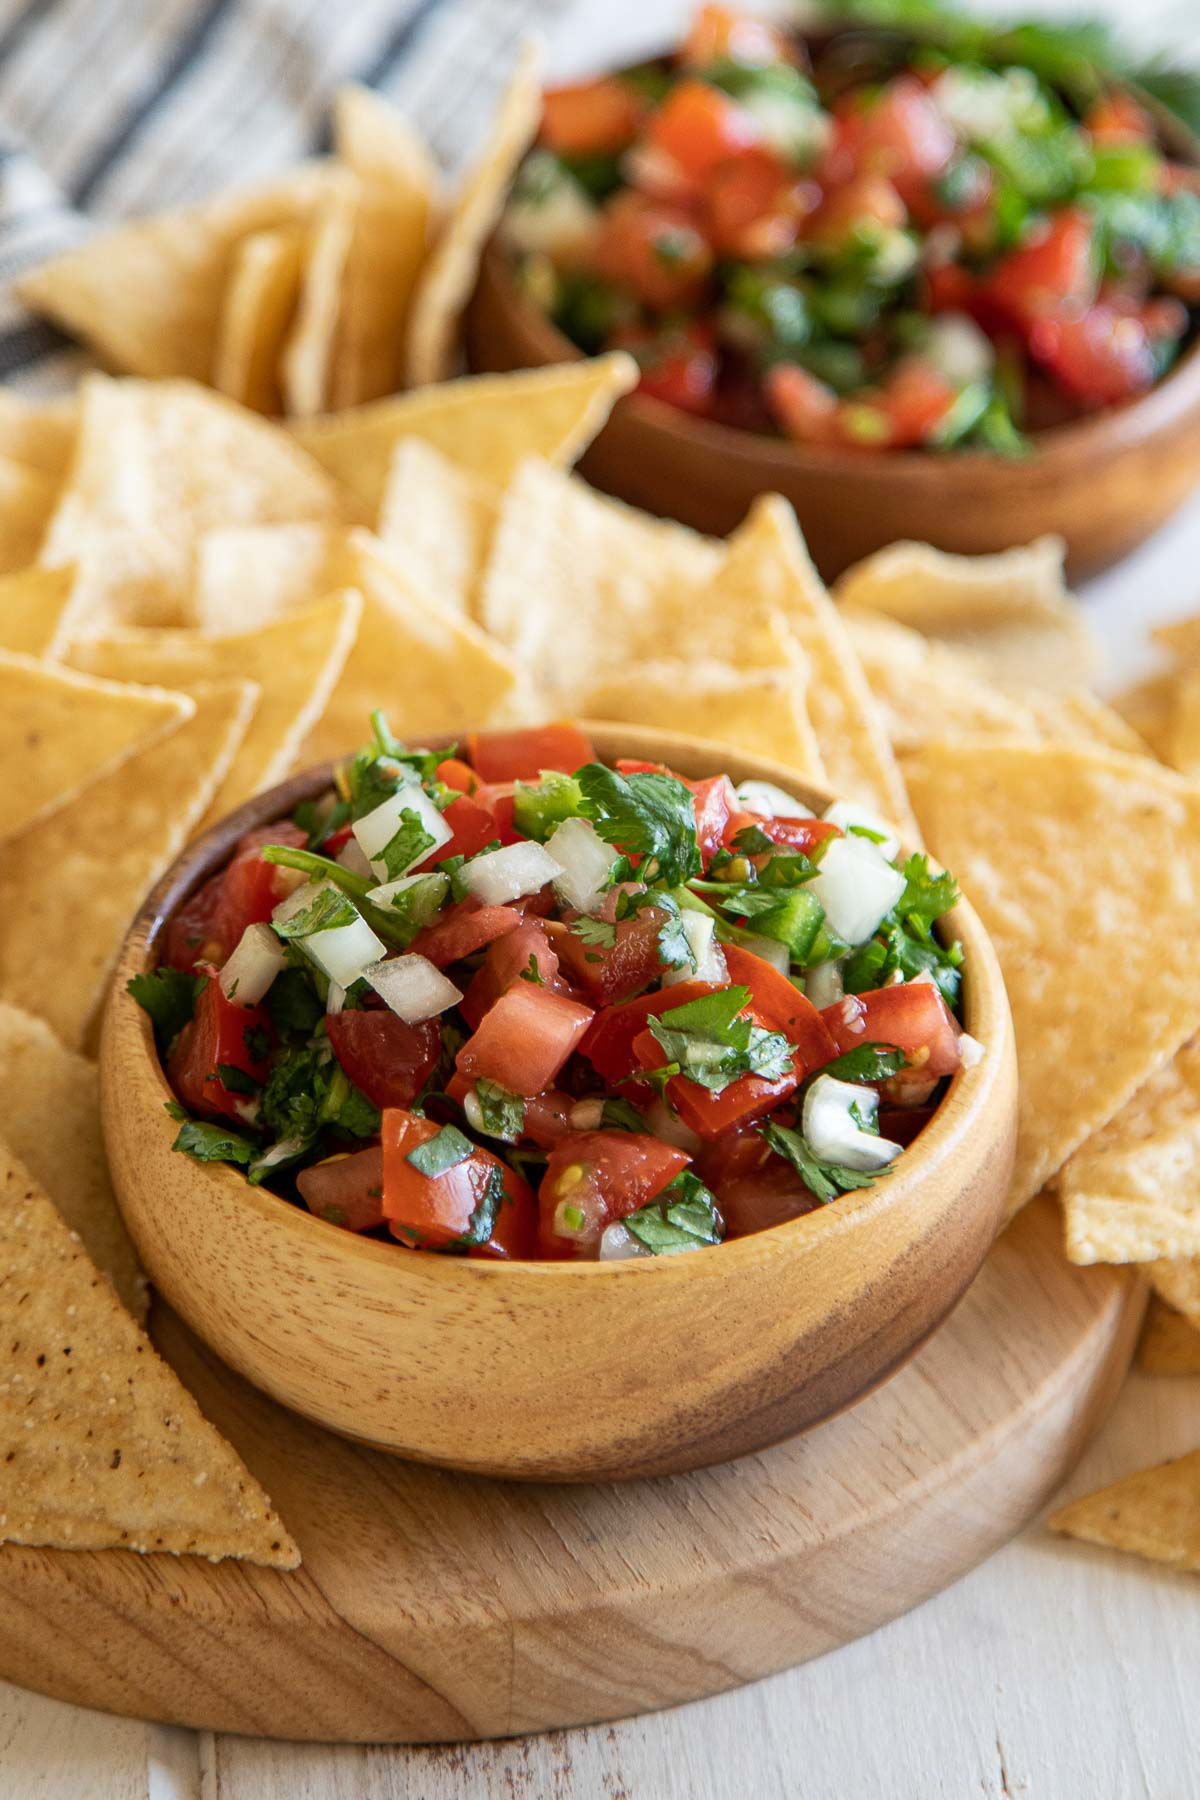 Homemade Pico de Gallo in Small Wooden Bowl with Chips